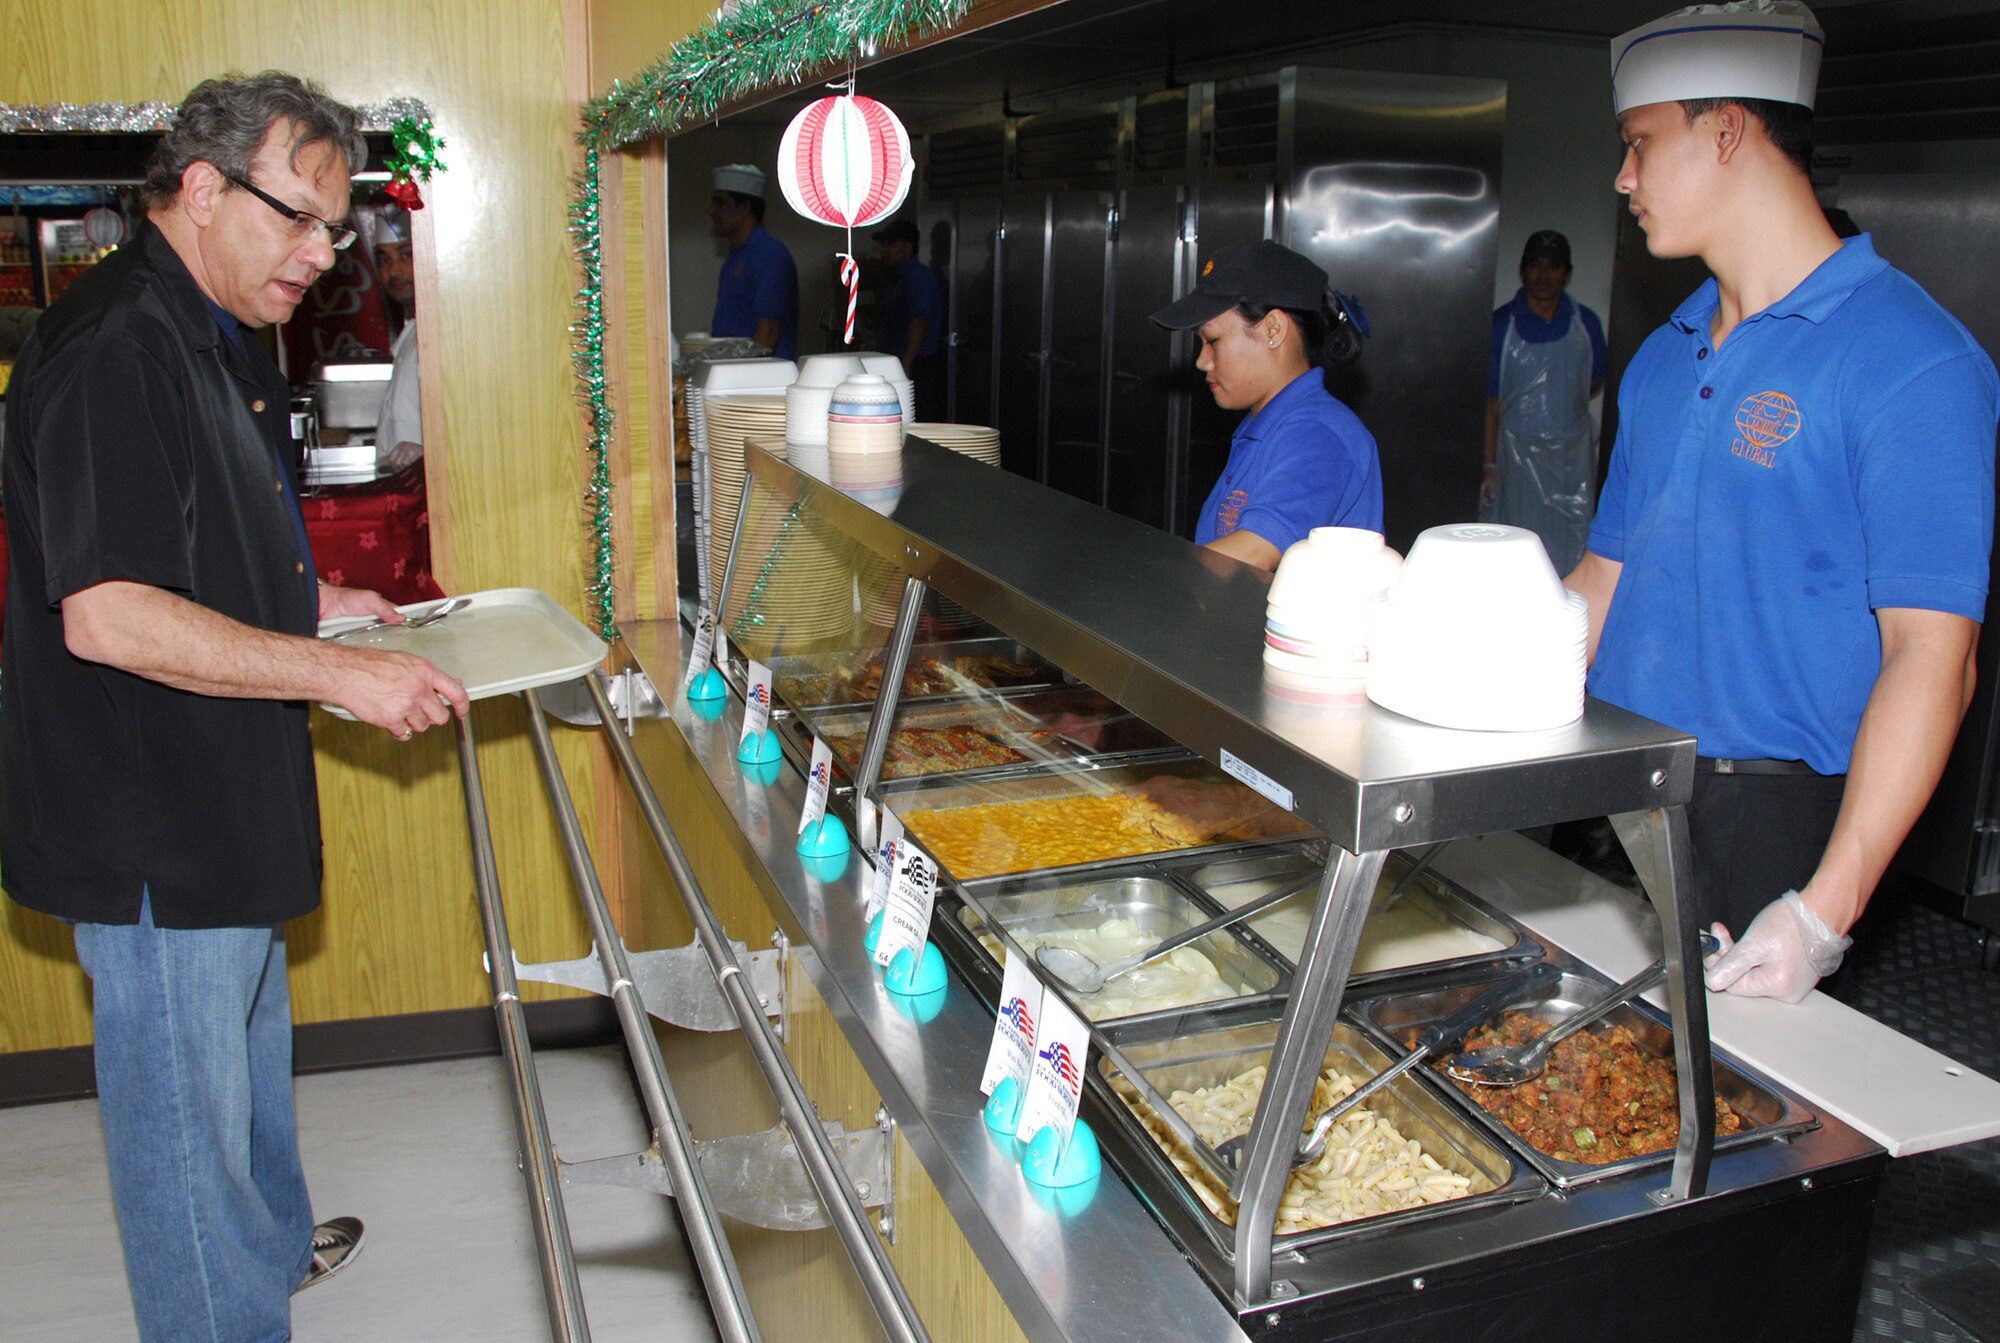 SOUTHWEST ASIA - Lewis Black mulls a dining choice at the Independence Dining Facility after at a Southwest Asia air base Dec. 17. Mr. Black is one of the celebrities touring with the USO 2007 holiday show. (U. S. Air Force photo/Staff Sgt. Douglas Olsen)